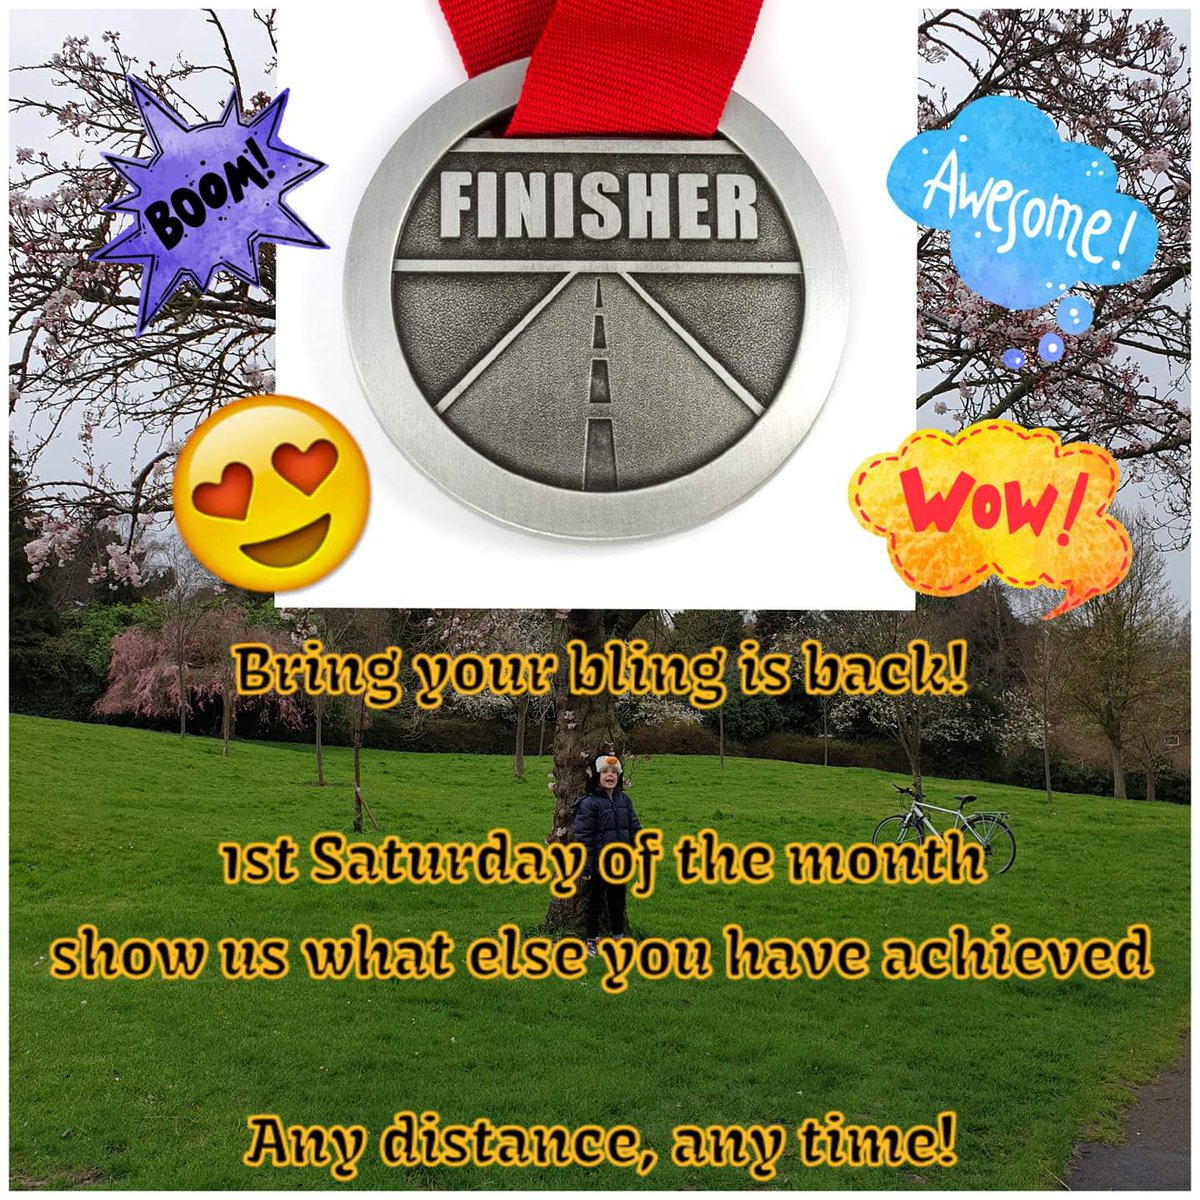 Bring your bling week is back... 1st Sat of every month is your opportunity to show off your well deserved medals, t-shirts etc from any races, aquathons, triathlons etc. Bring it along and wear it with pride when we call you up during the run brief.